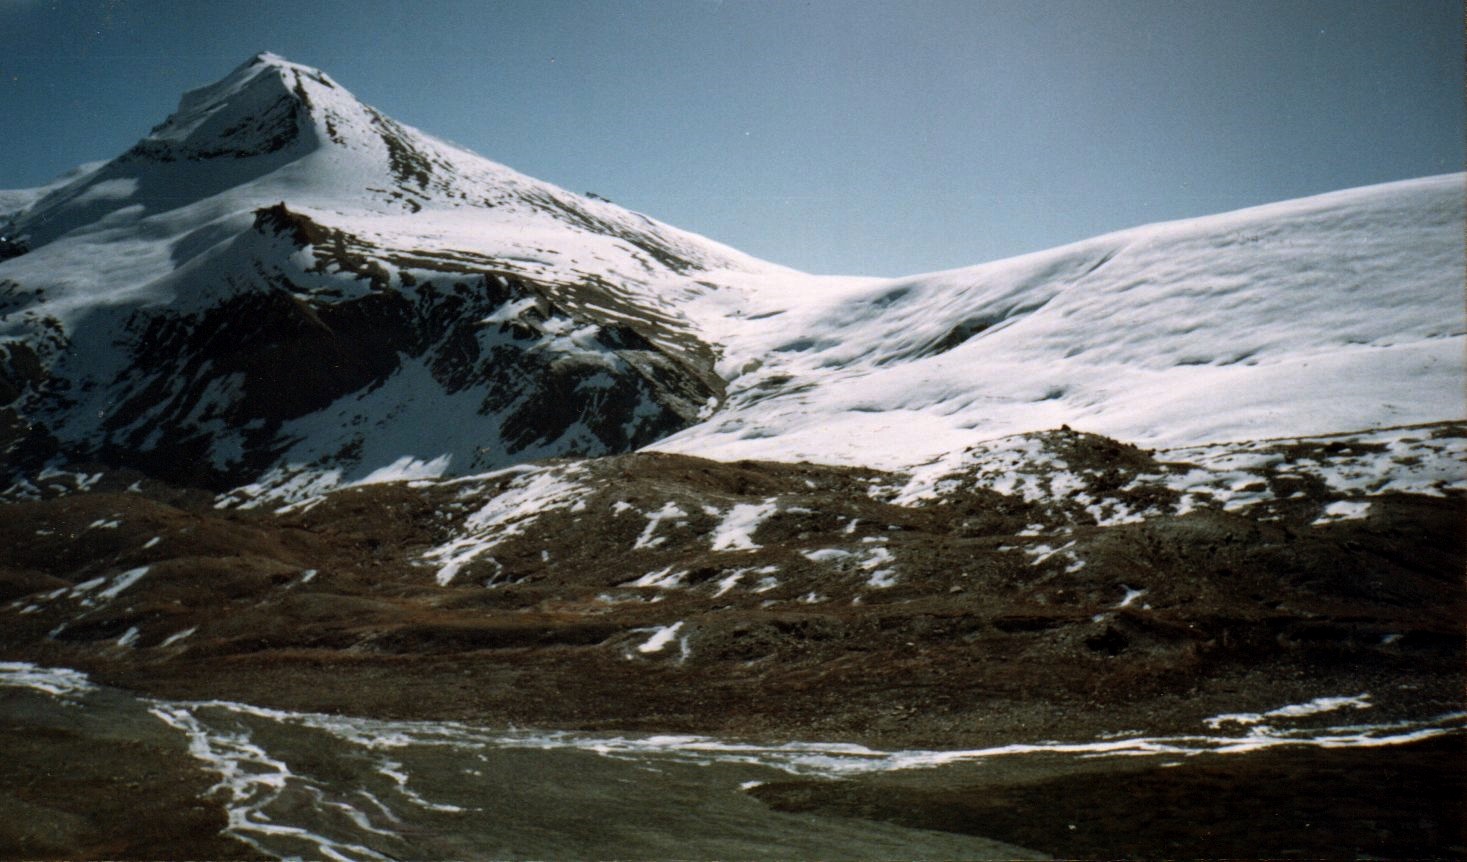 Thapa (Dhampus ) Peak ( c6000m ) and Thapa Pass above The Hidden Valley